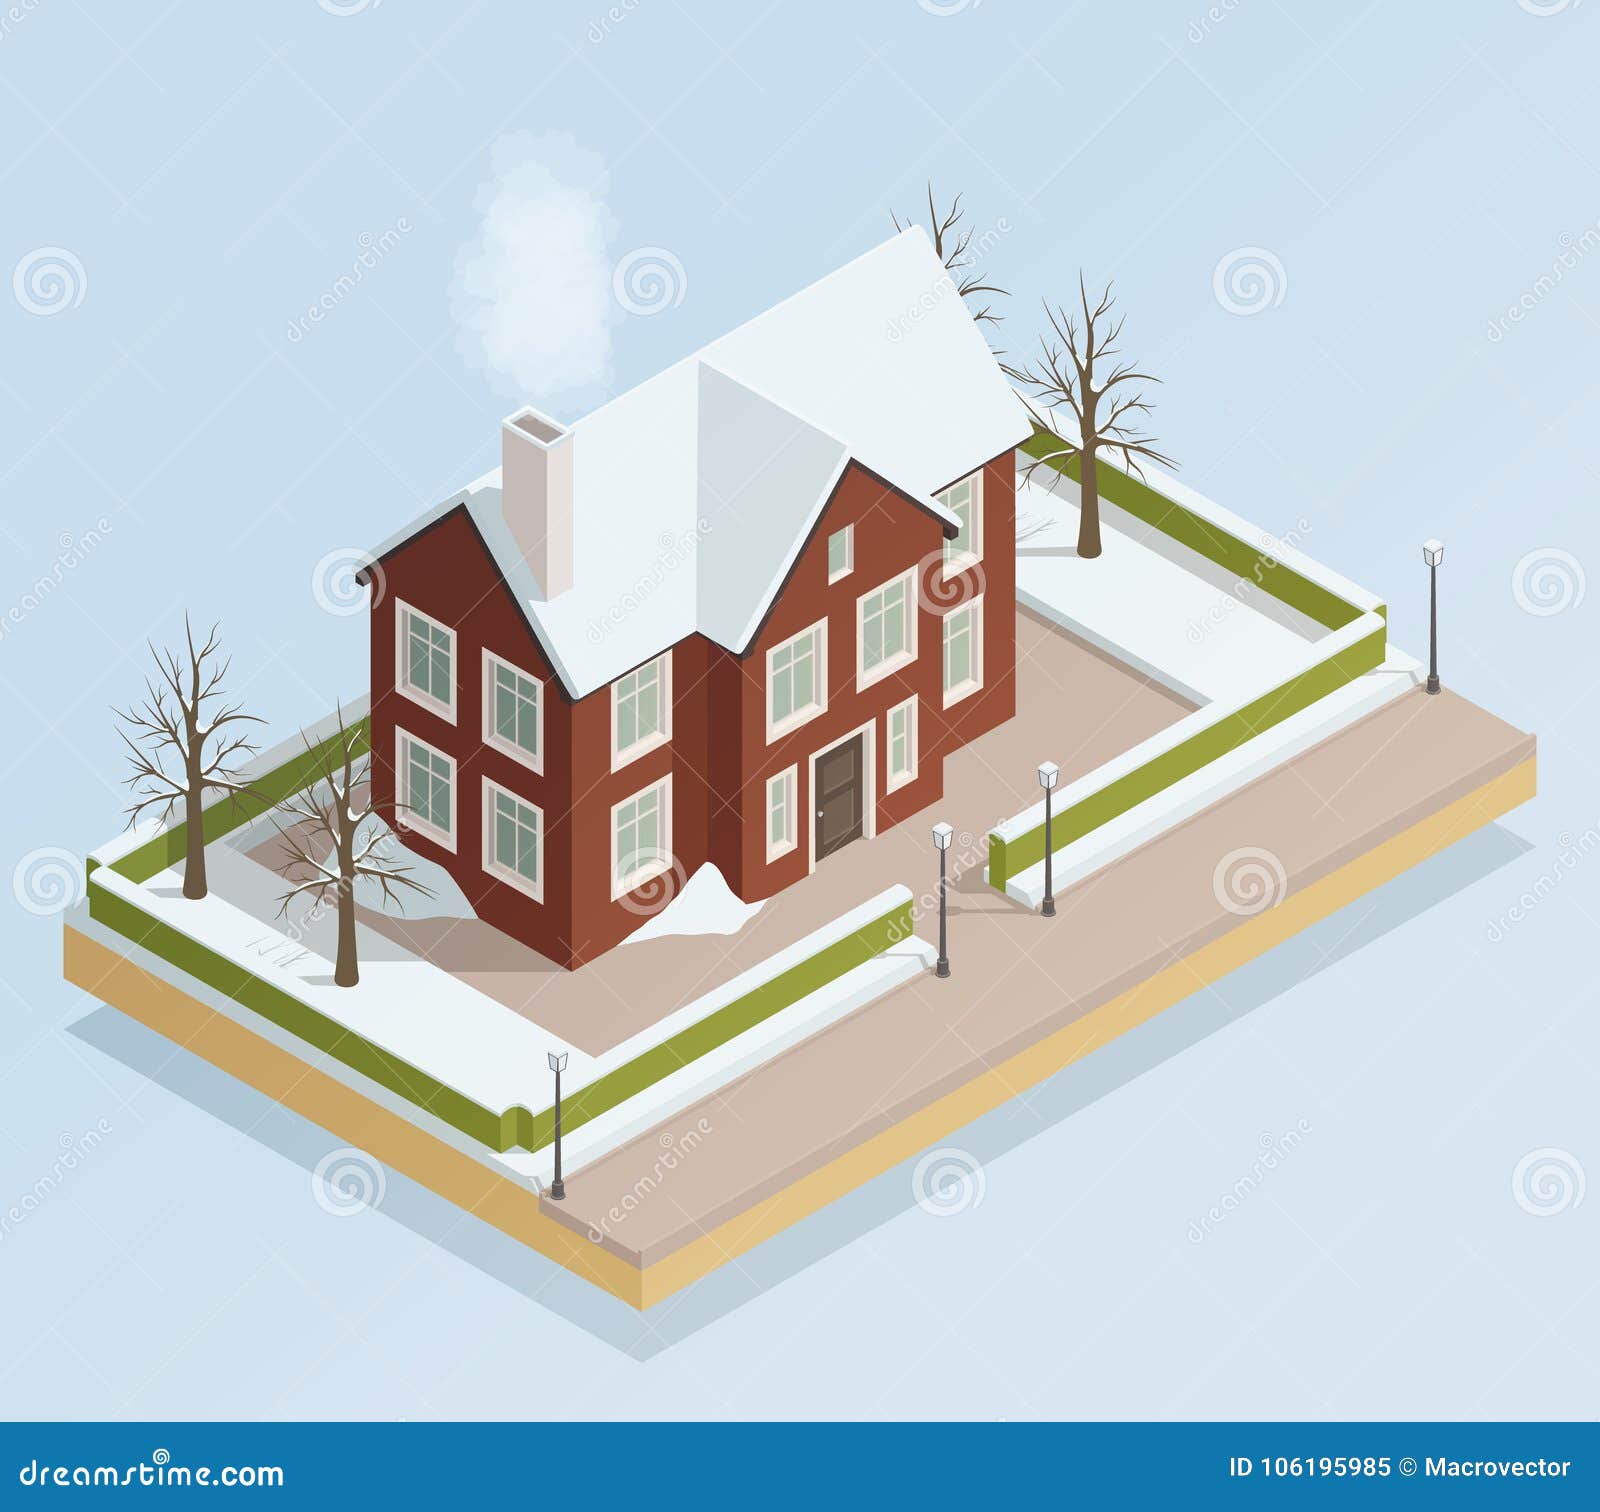 Download Winter House Outdoor Isometric View Stock Vector ...